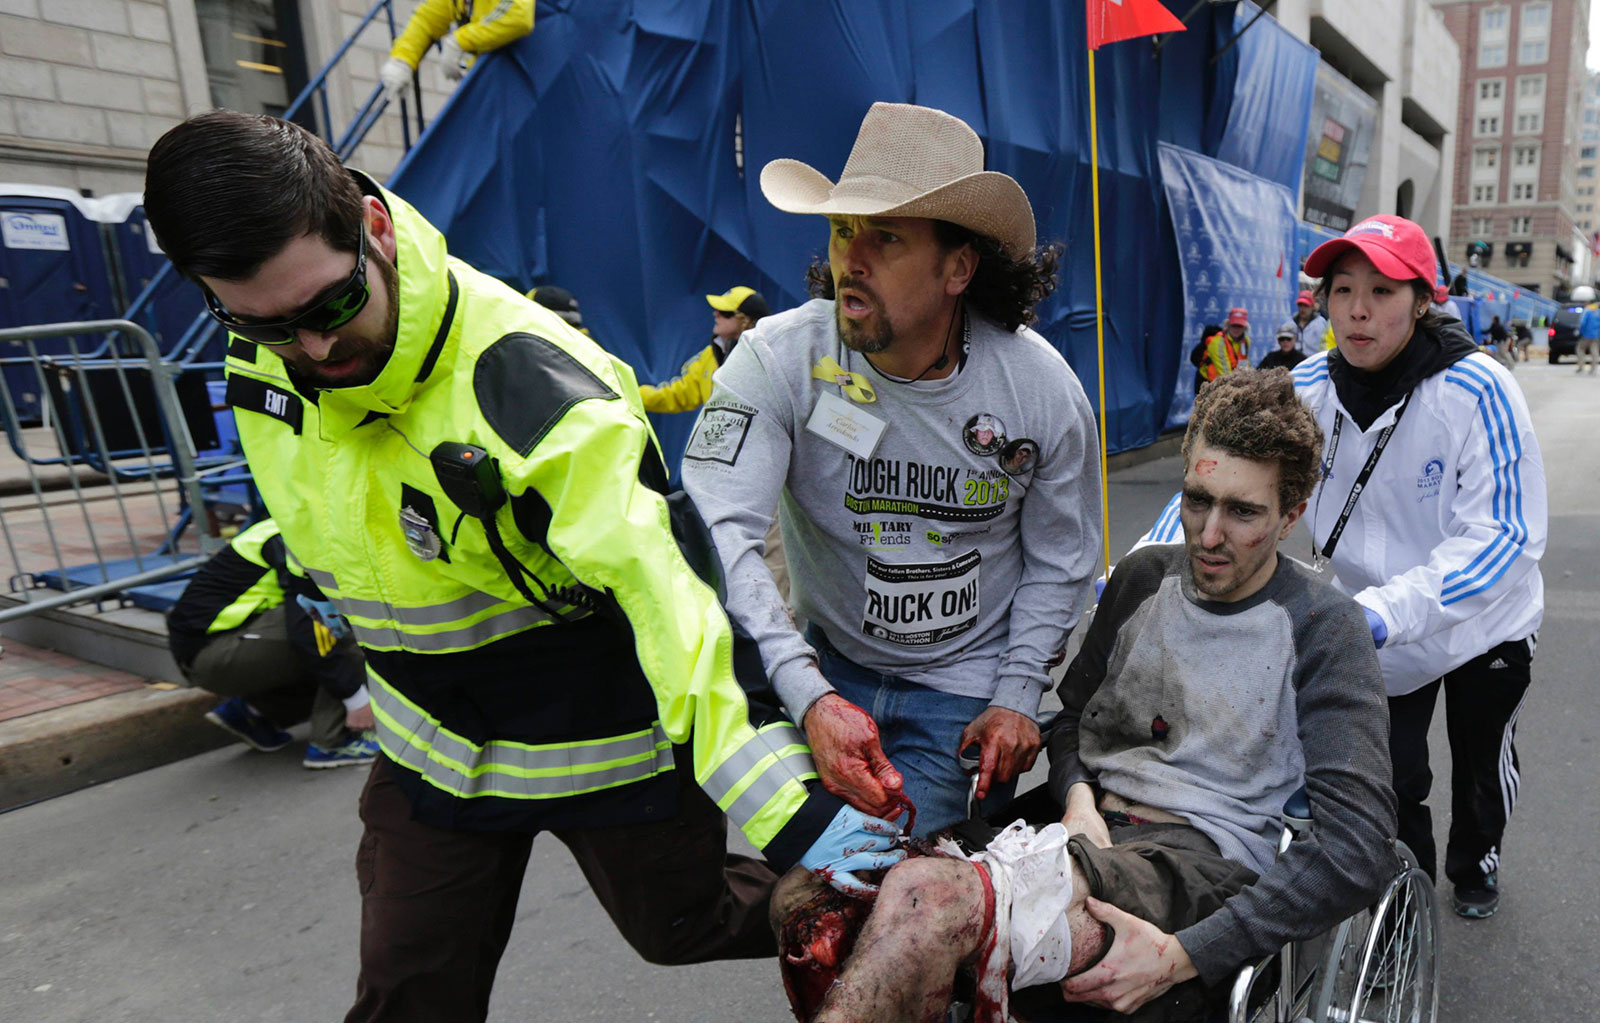 Carlos Arredondo helps Jeff Bauman after the Boston Marathon bombings. The two are now best friends. 2013